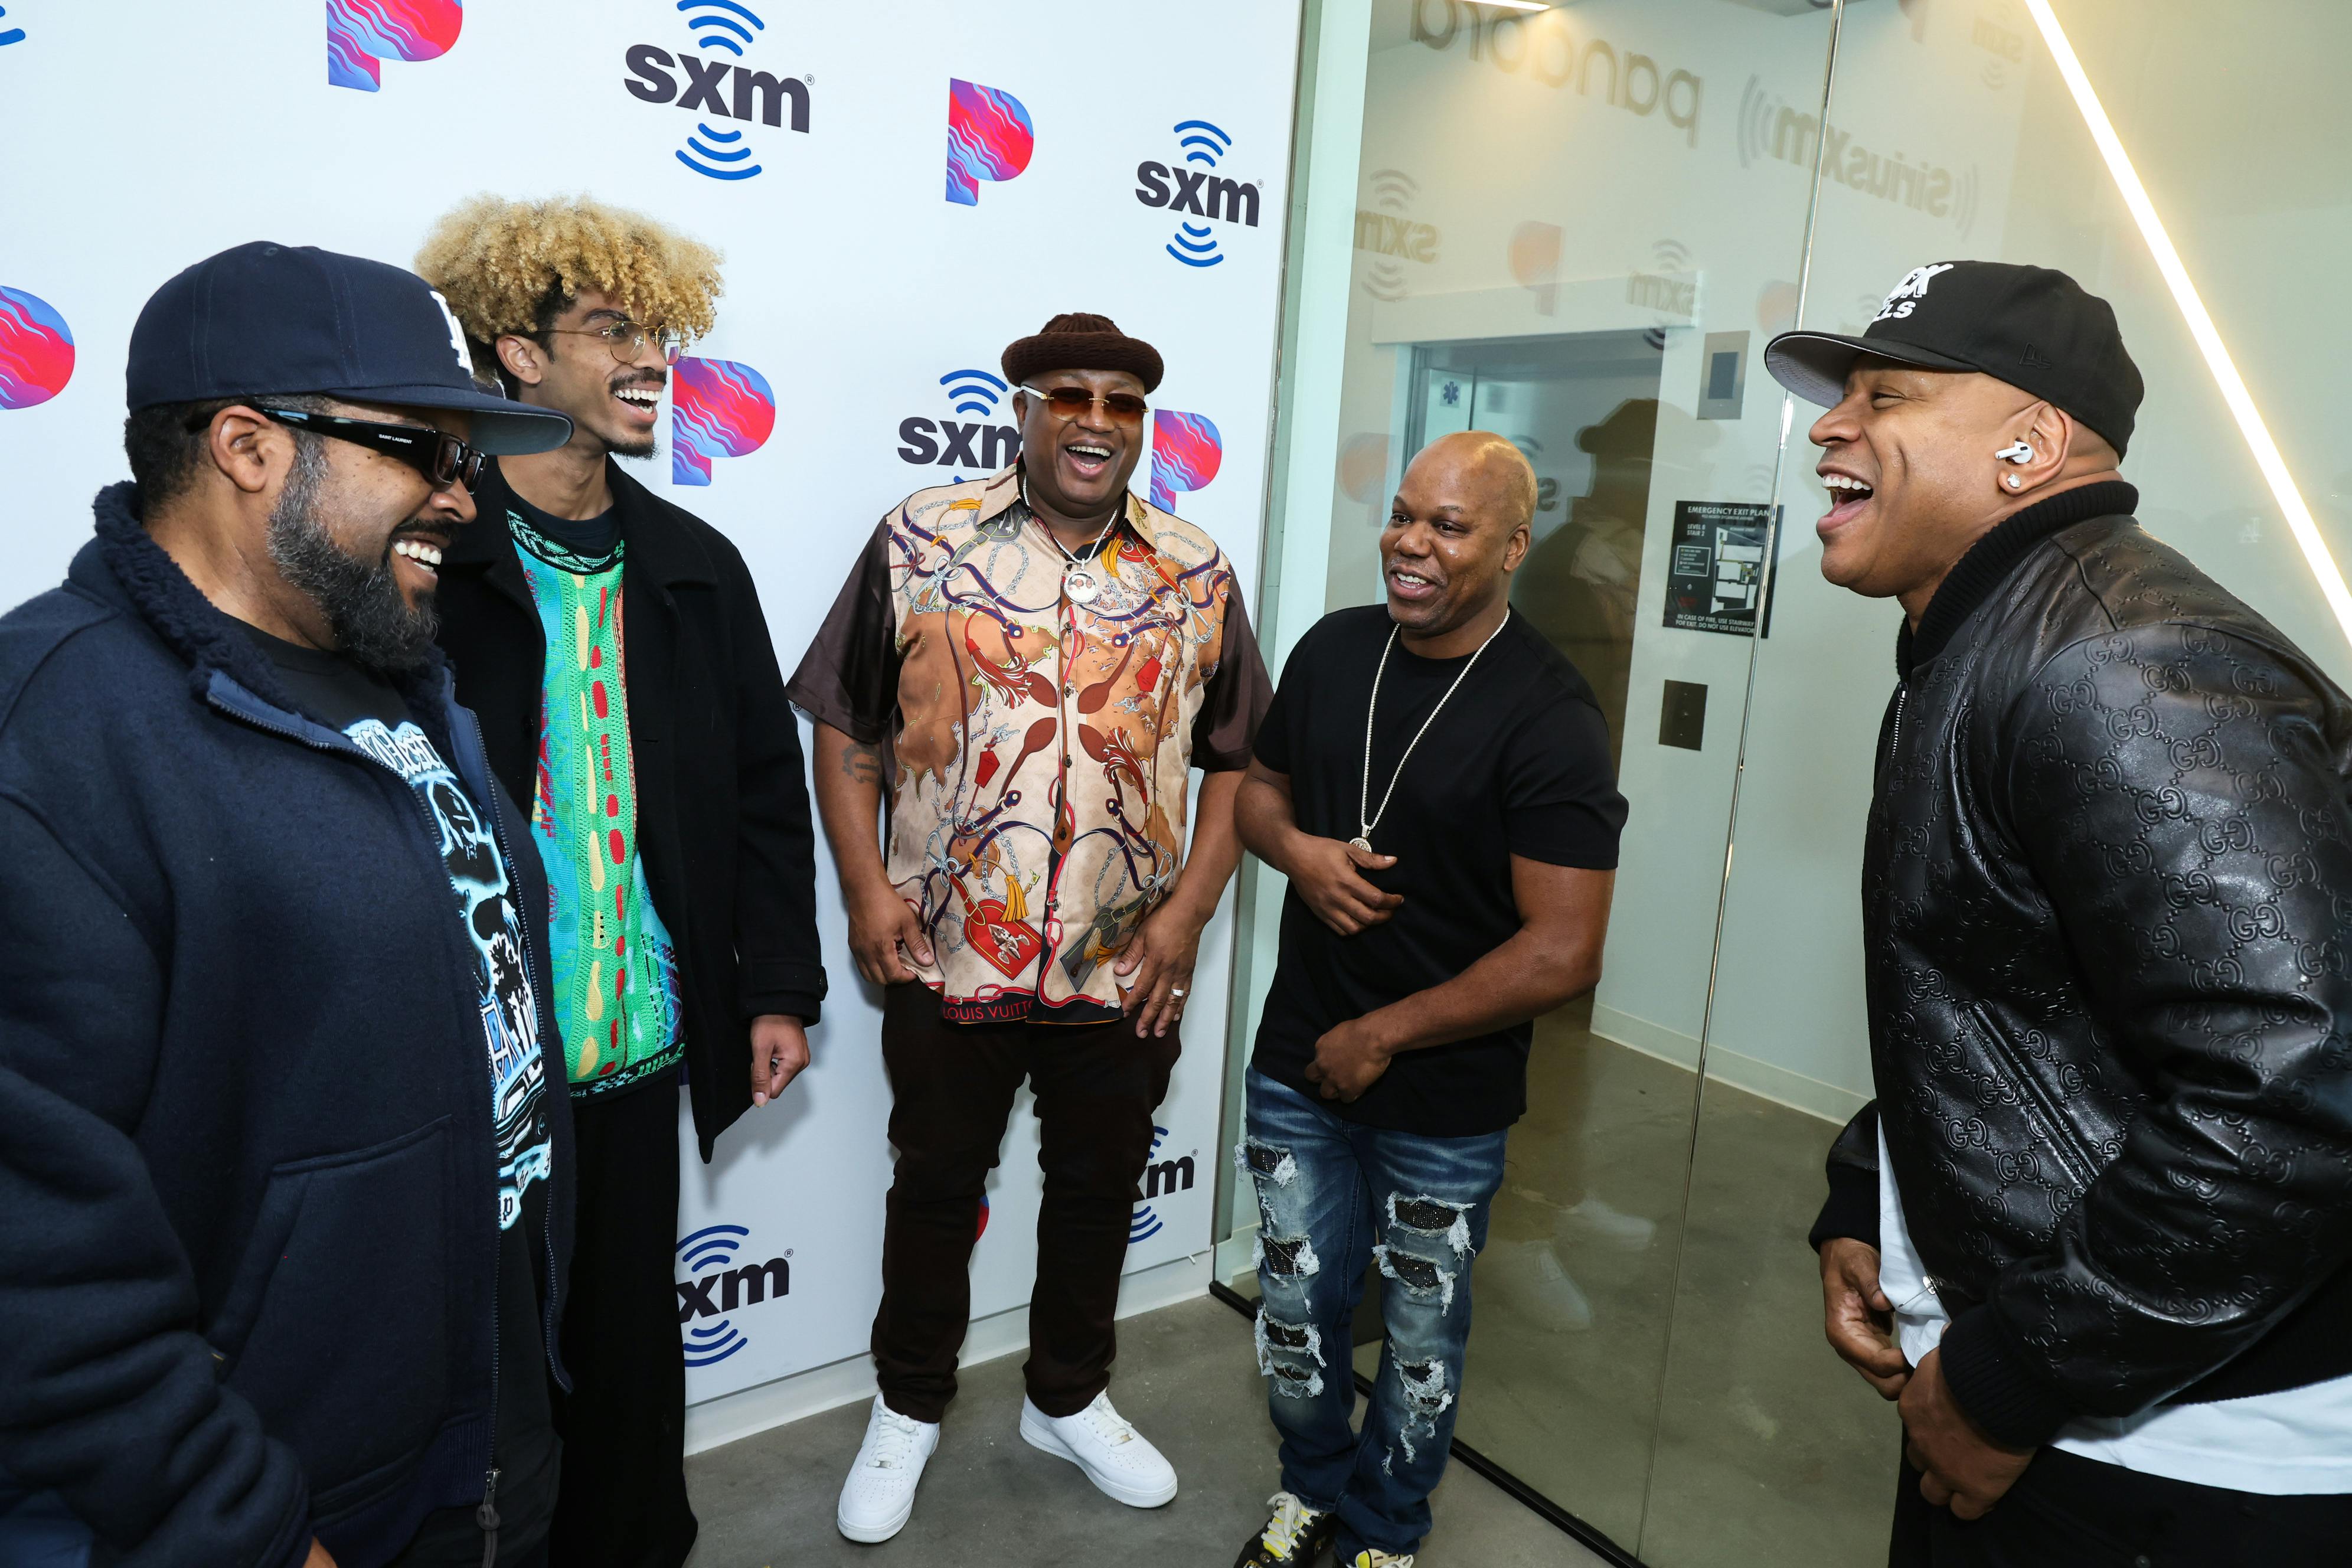 LOS ANGELES, CALIFORNIA - DECEMBER 07: (L-R) Ice Cube, a guest, E-40, Too Short and LL Cool J attend SiriusXM and Pandora Playback with Mount Westmore including E-40, Too Short & Ice Cube at SiriusXM Studios on December 07, 2022 in Los Angeles, California. (Photo by Randy Shropshire/Getty Images for SiriusXM)